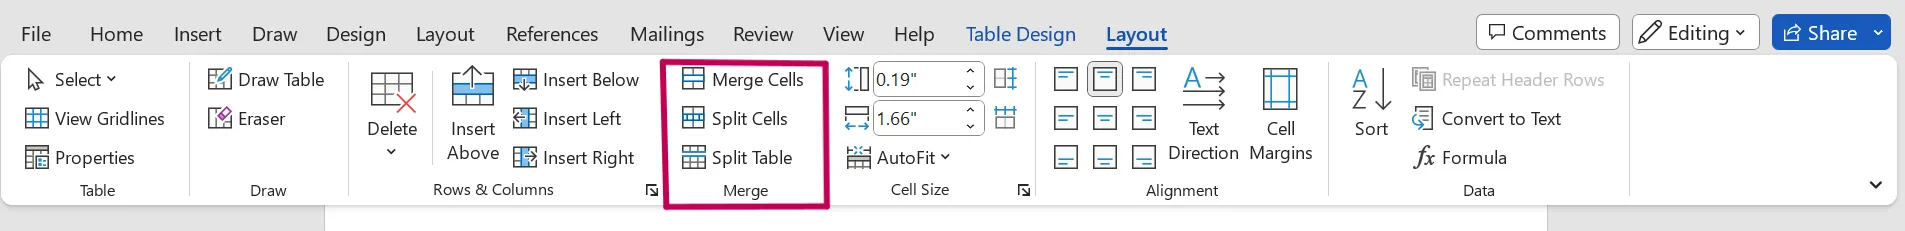 layout tab in word